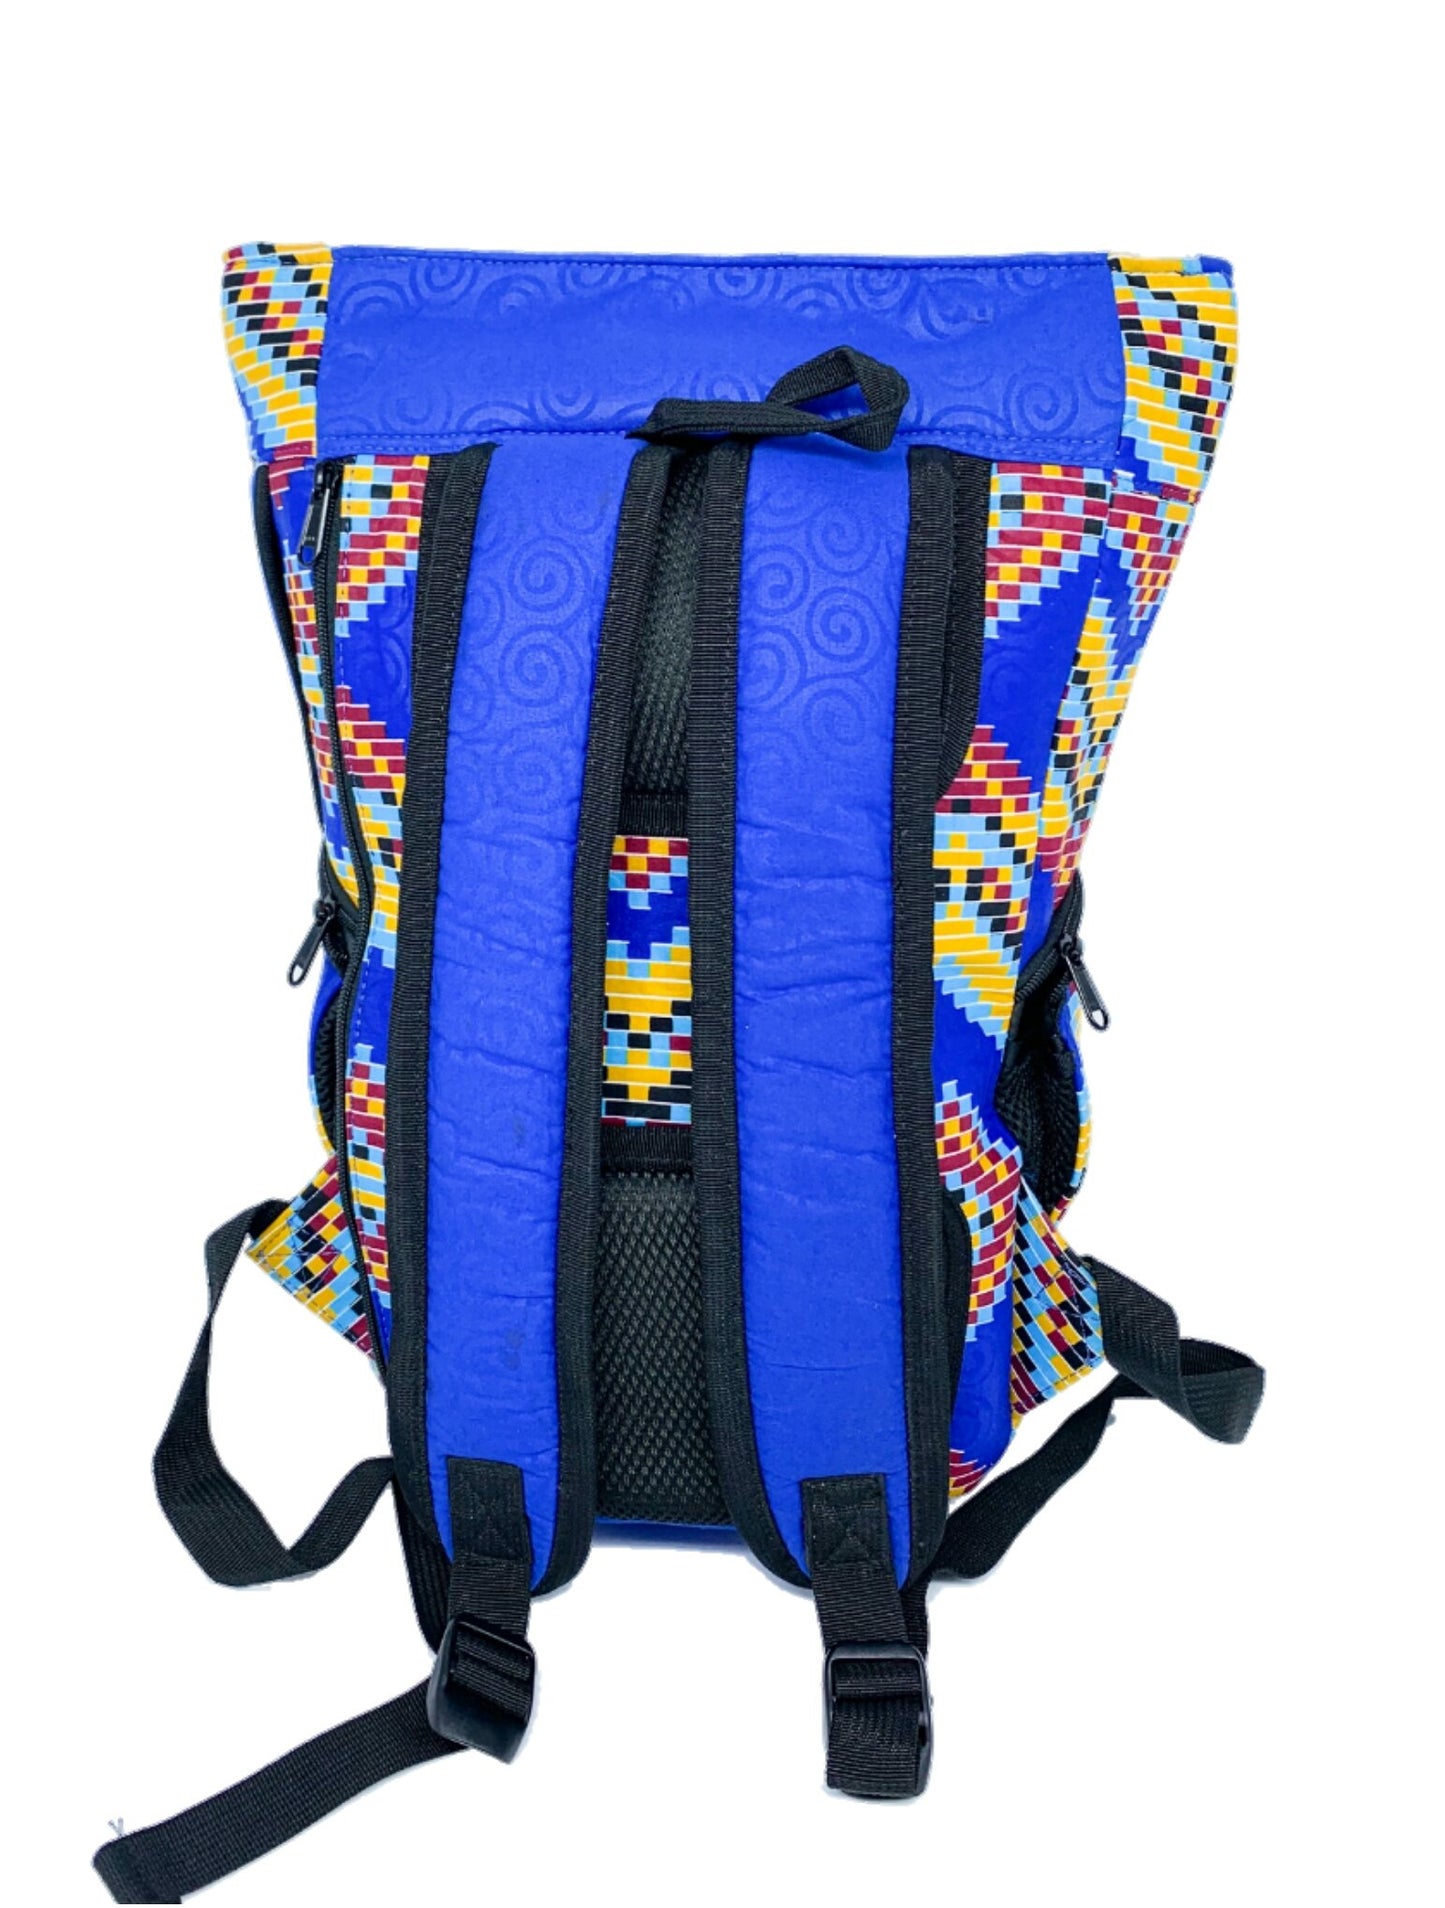 Bea Handcrafted Ankara  Backpack: Boho Style with Plenty of Room for Adventure